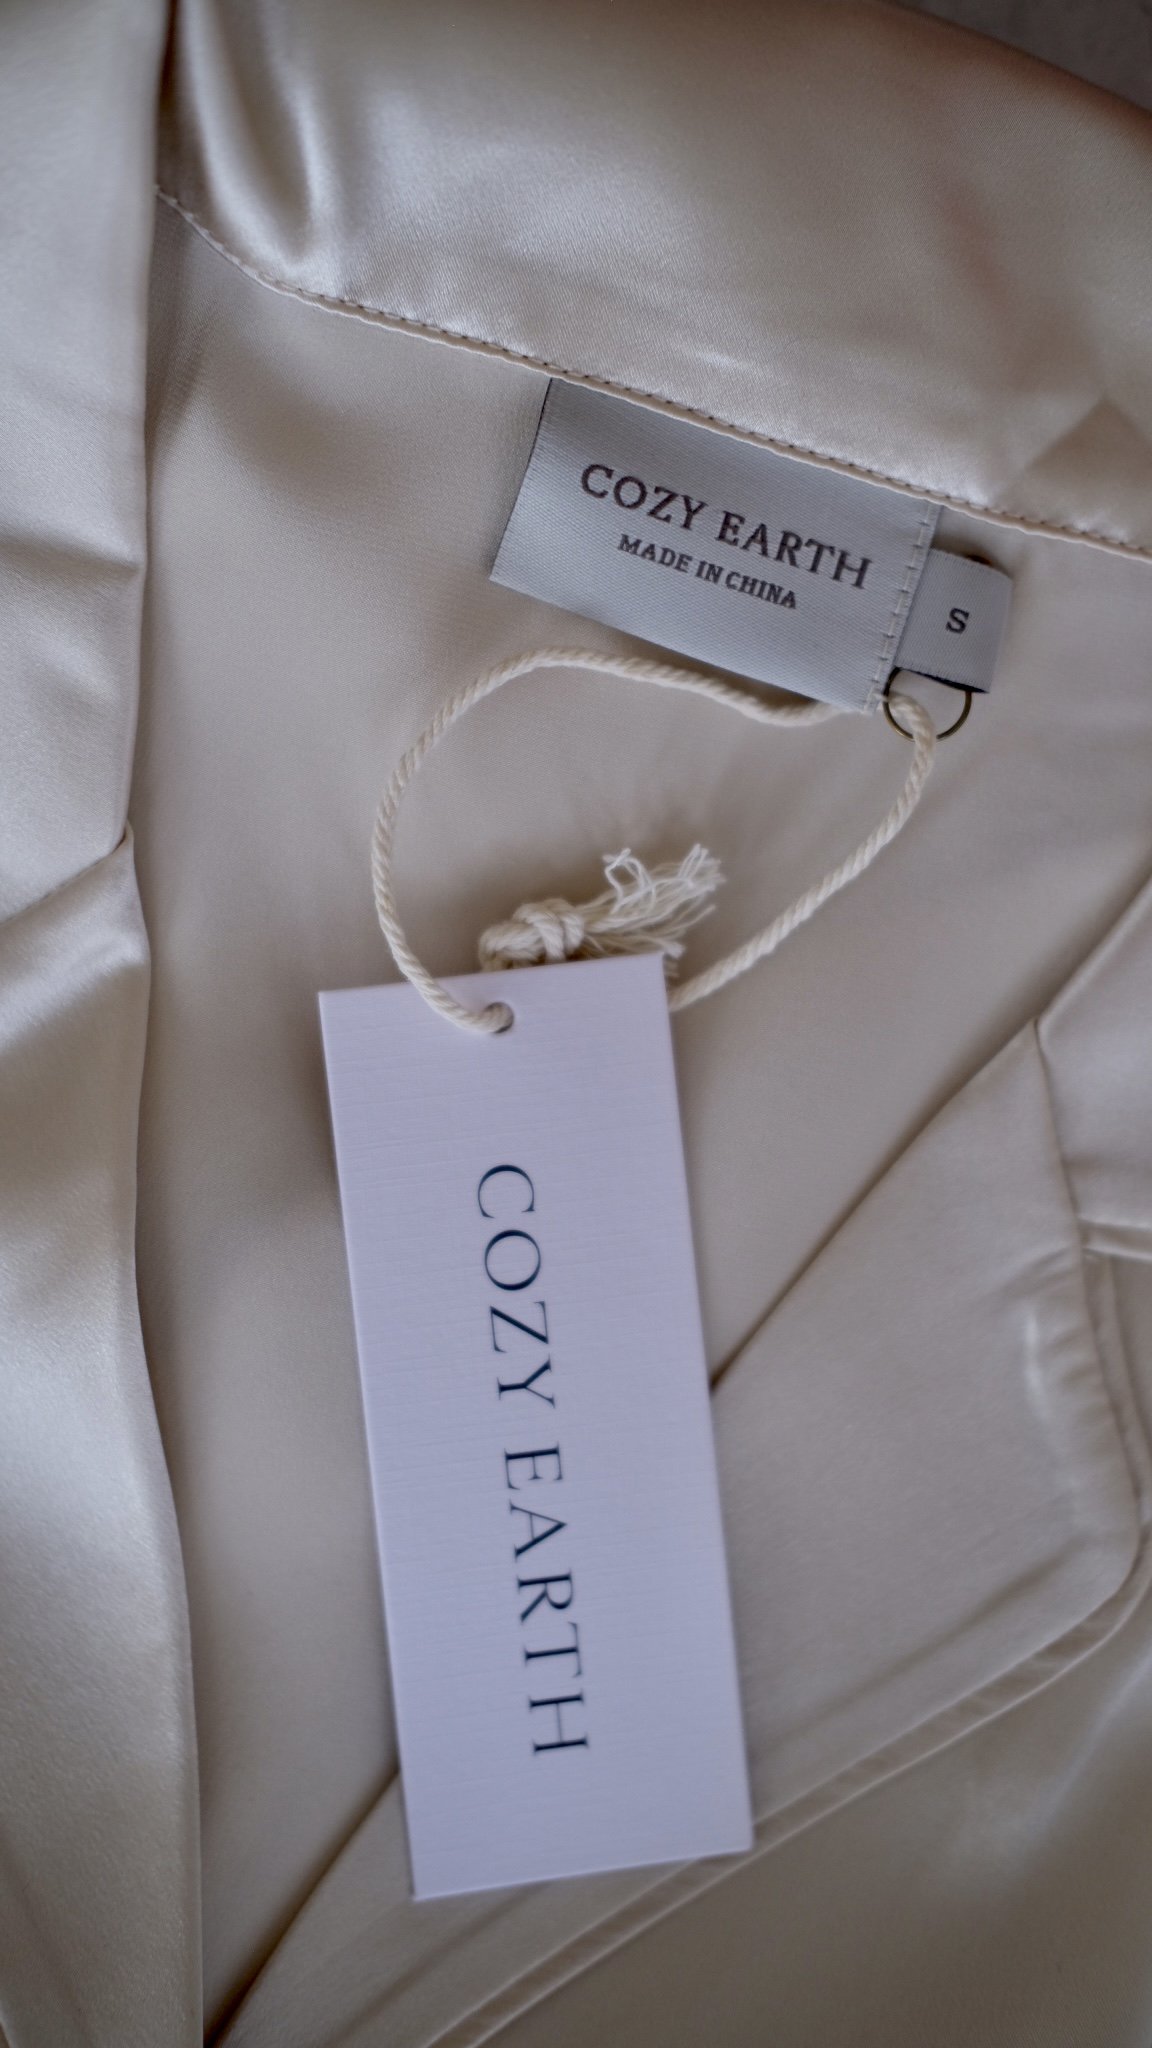 Cozy earth pajamas review and Cozy Earth promo code